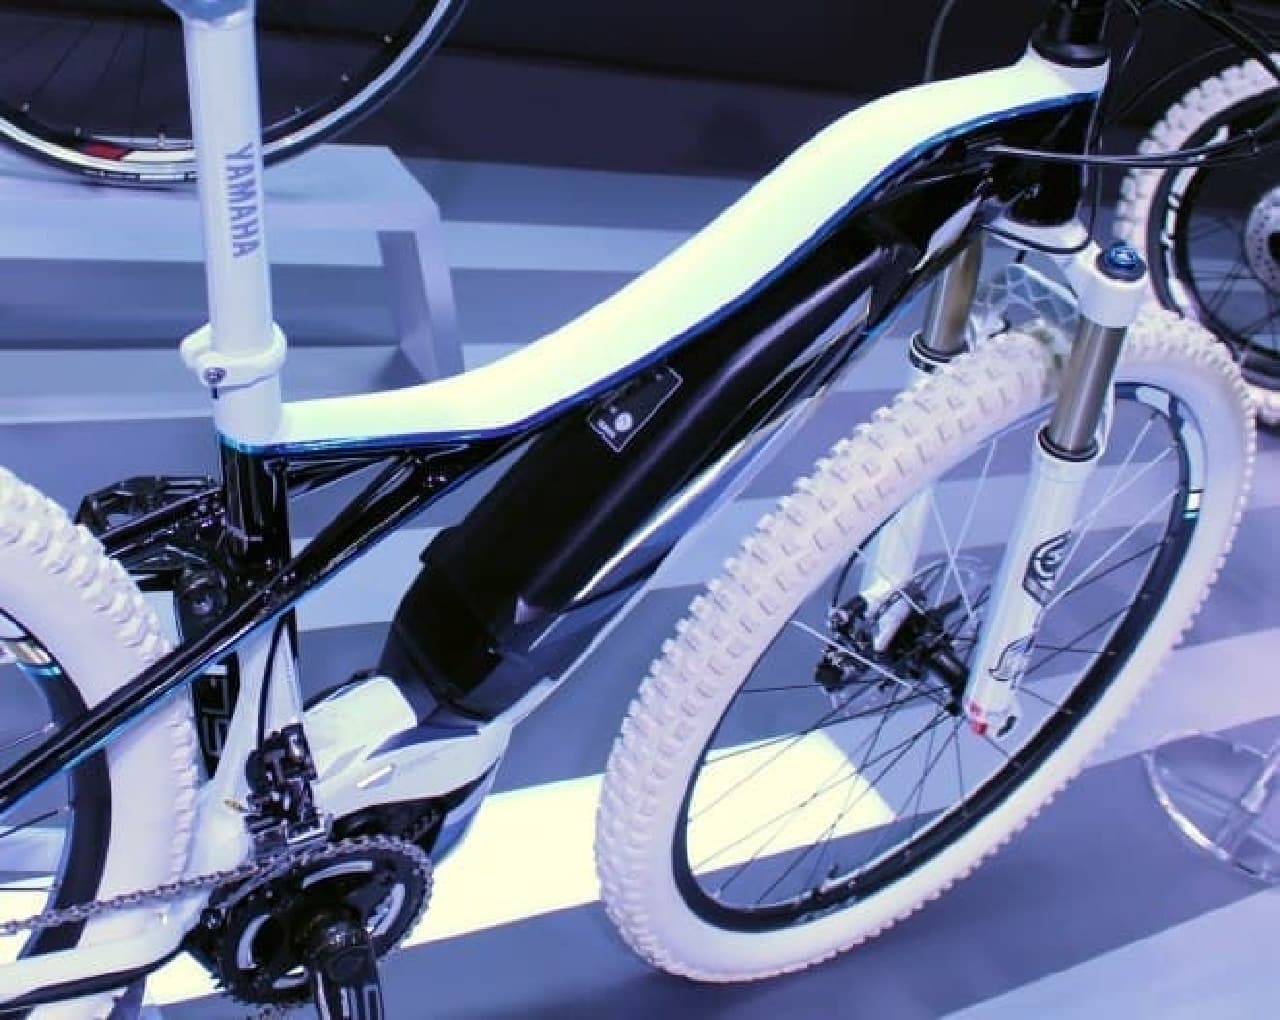 Battery mounted on "YPJ-MTB CONCEPT" Large capacity that can be seen visually